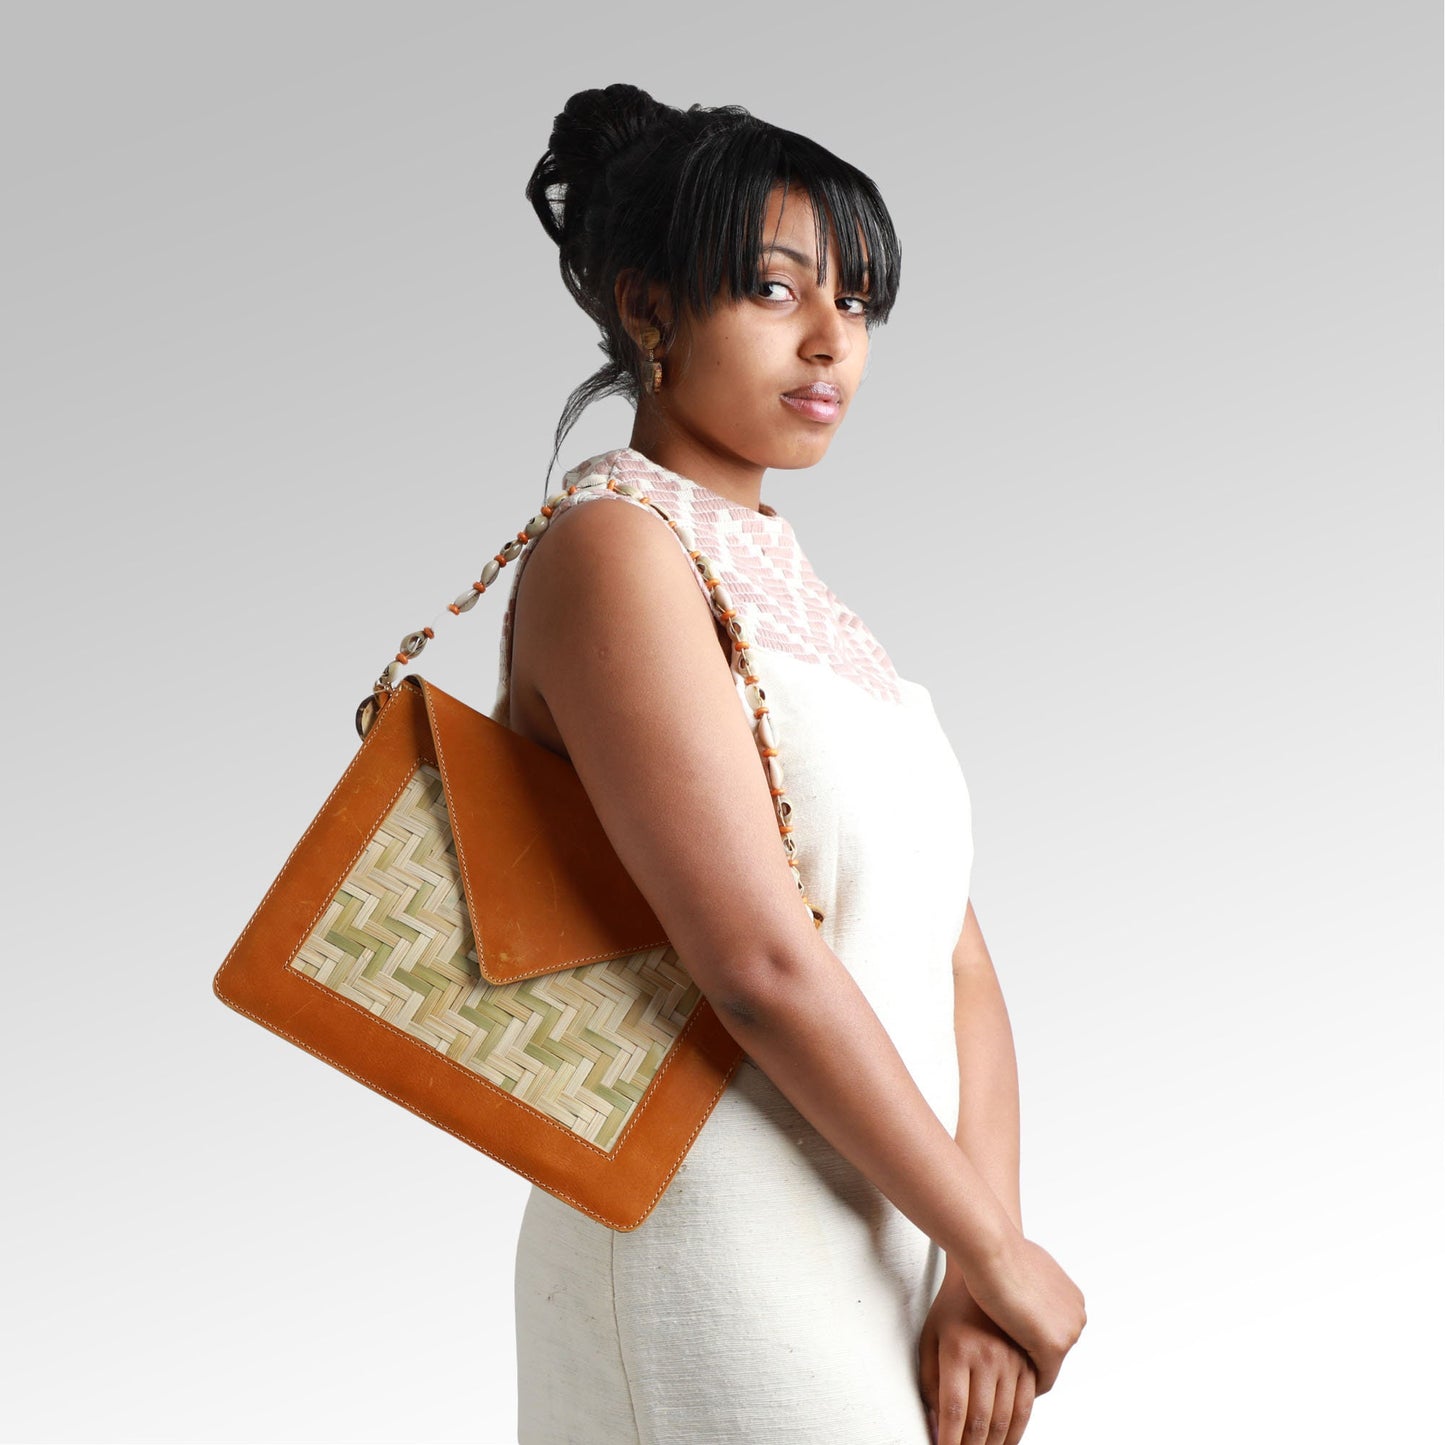 Yewubdar - Ethiopian slim shoulder bag handmade from bamboo, high quality leather, handwoven fabric, and shells by Tenadam